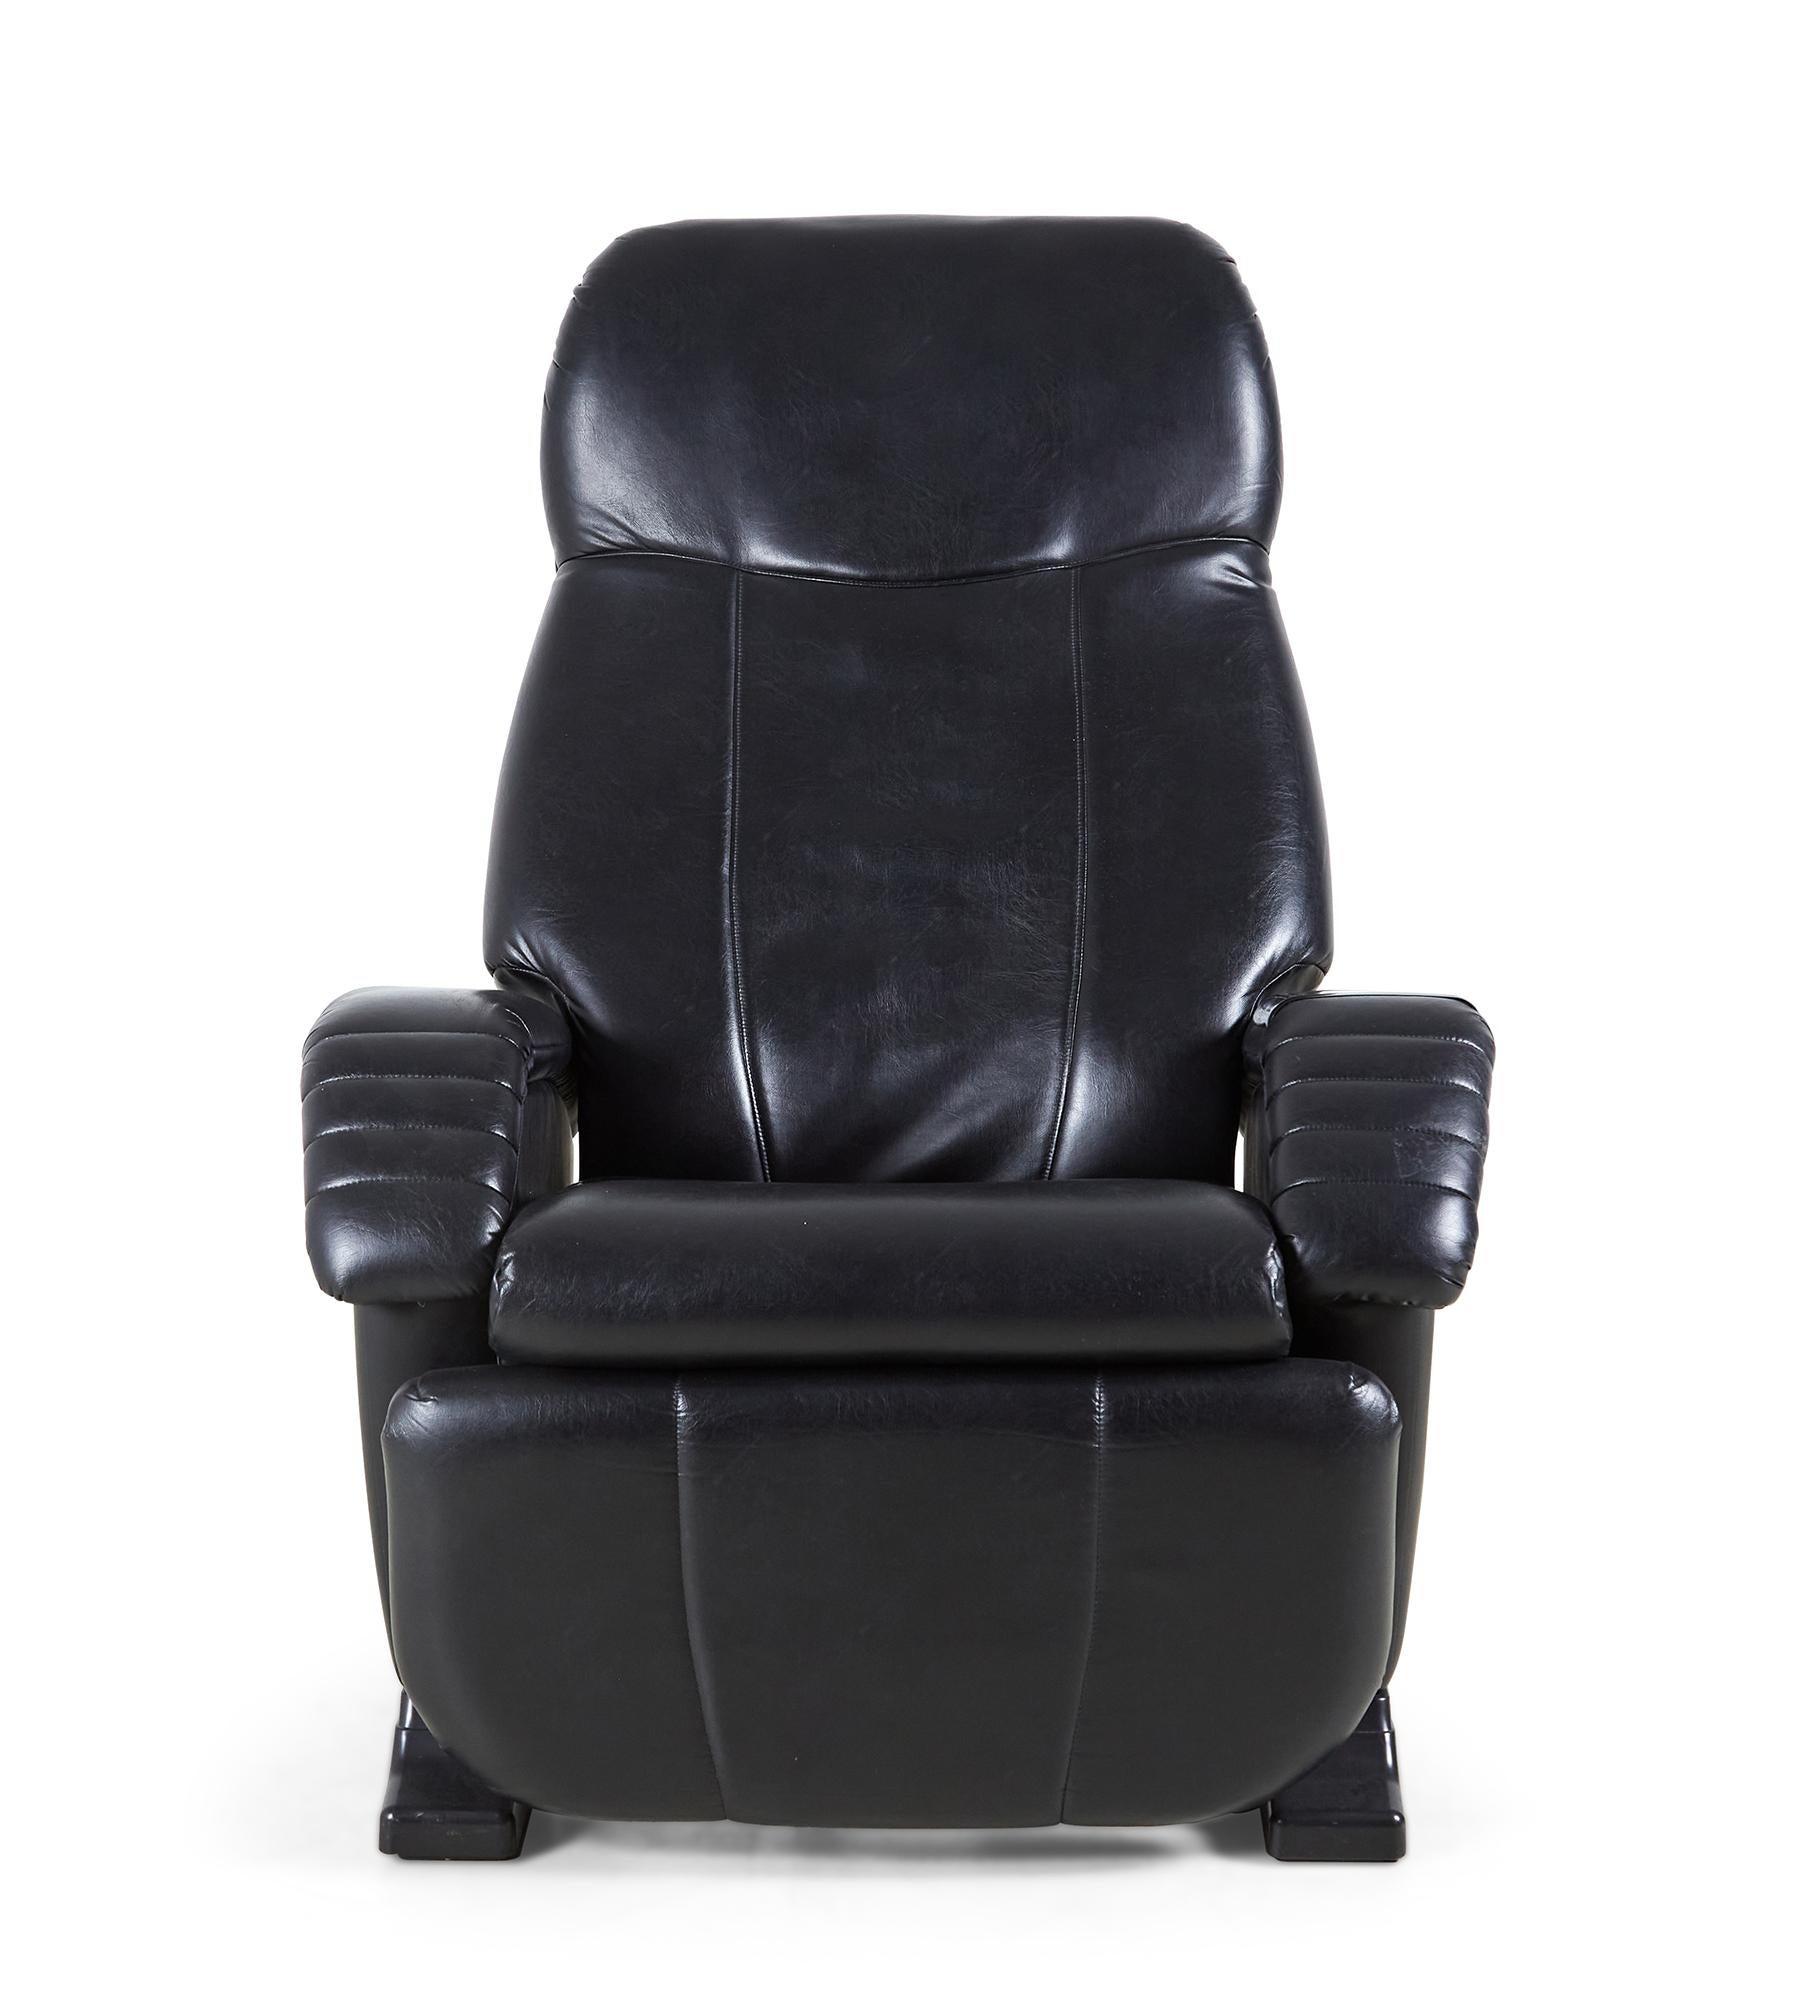 American Contemporary Black Leather Massage Chair 2